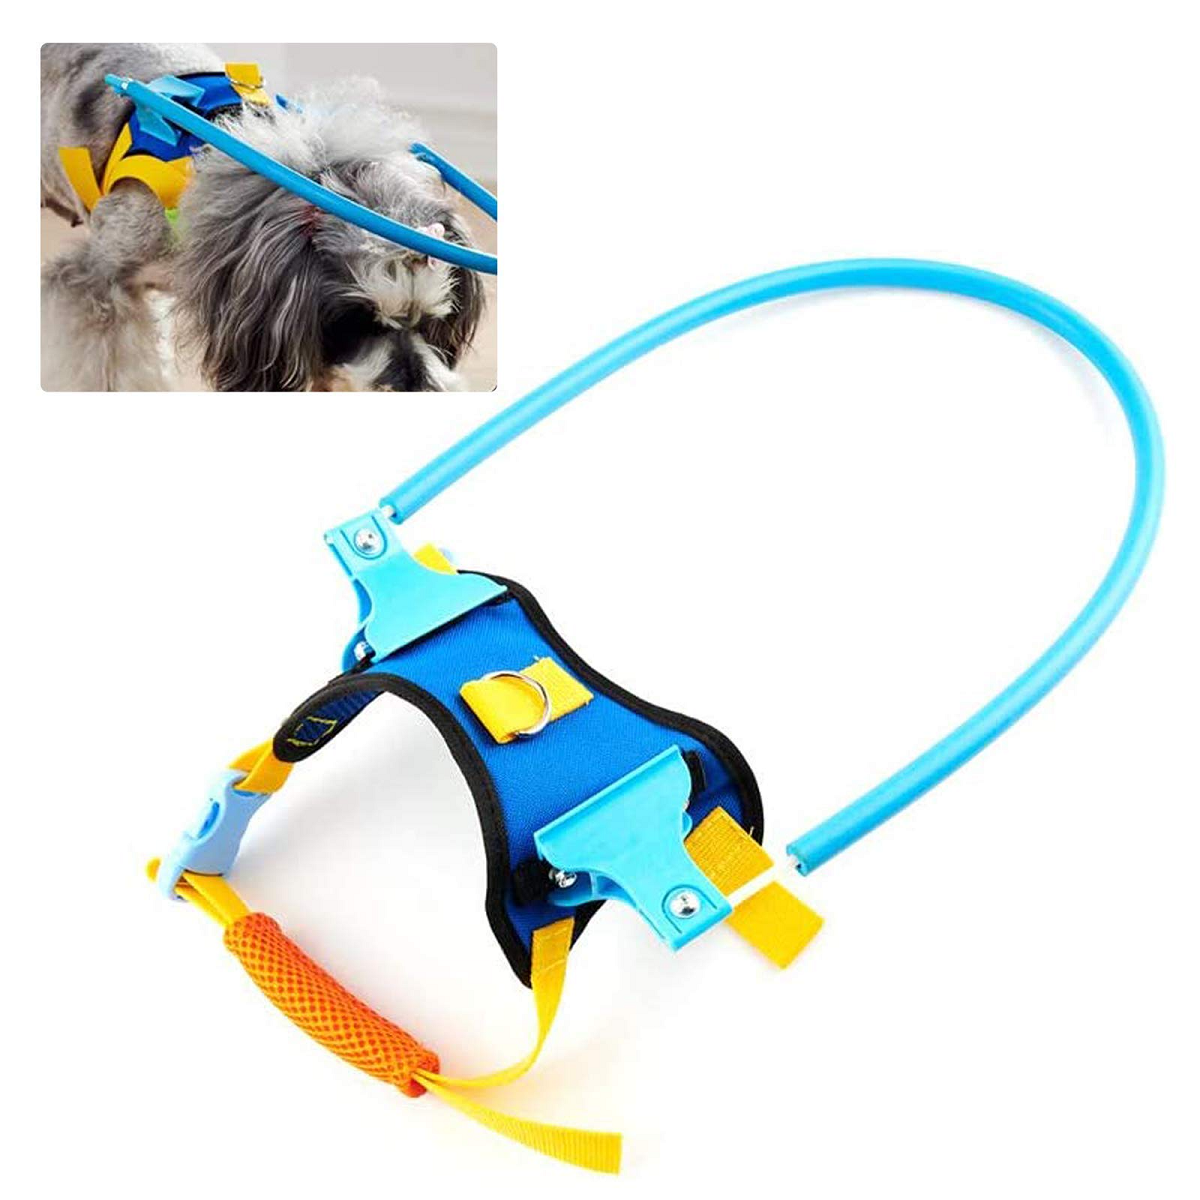 Yinrunx Harness Guide Device Help for Blind Dogs or Visually Impaired Pets to Avoid Accidents & Build Confidence Ideal Blind Dog Accessory to Navigate Surroundings